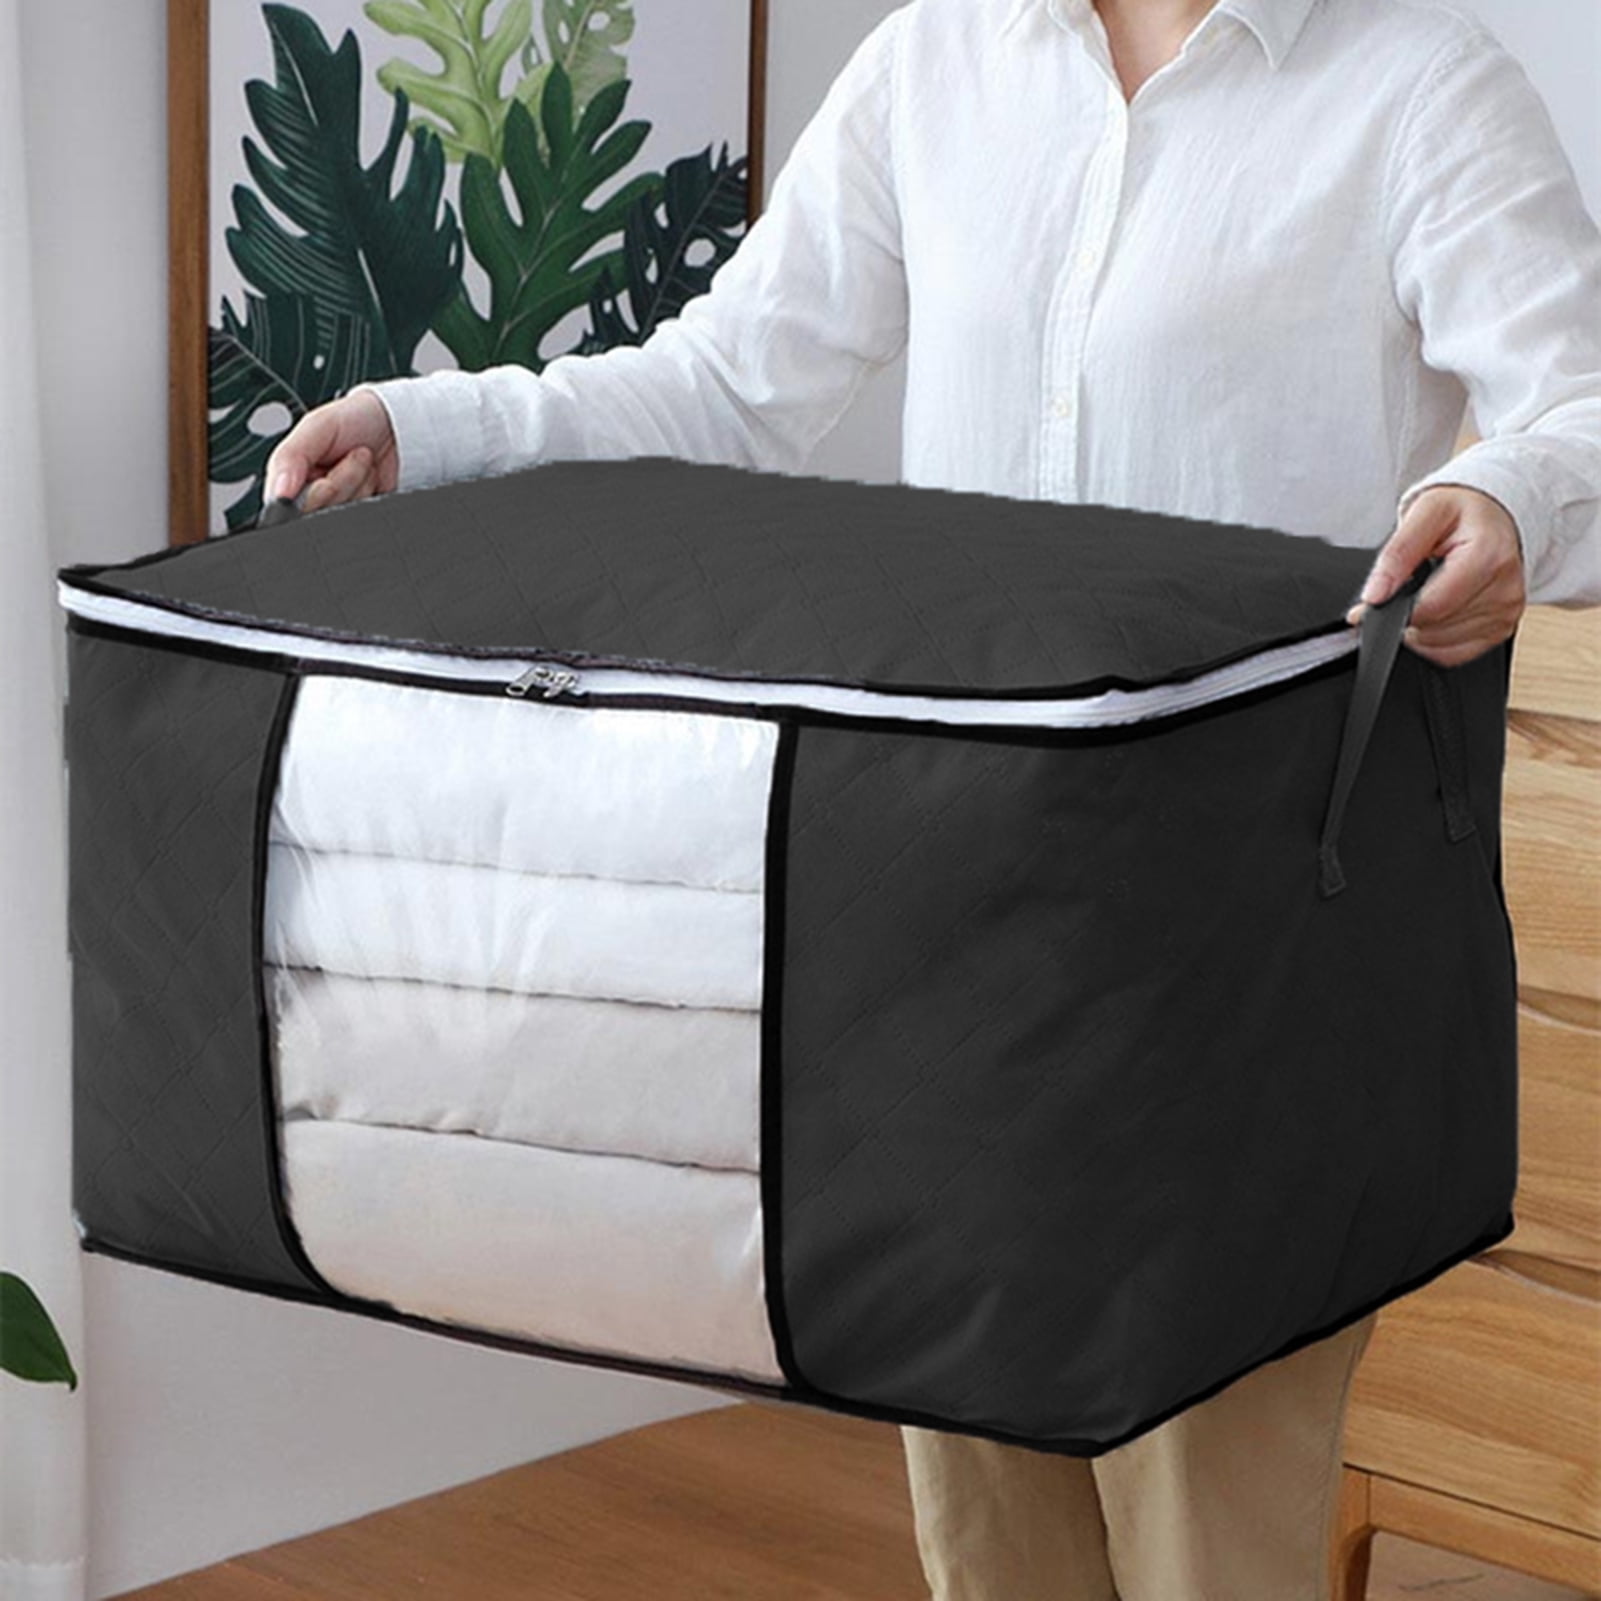 Portable Clothes Compression Bag, Space-saving Storage Bag Containers,  Bedroom Closet Organizer For Clothes Blanket Comforters Bed Sheets Pillows